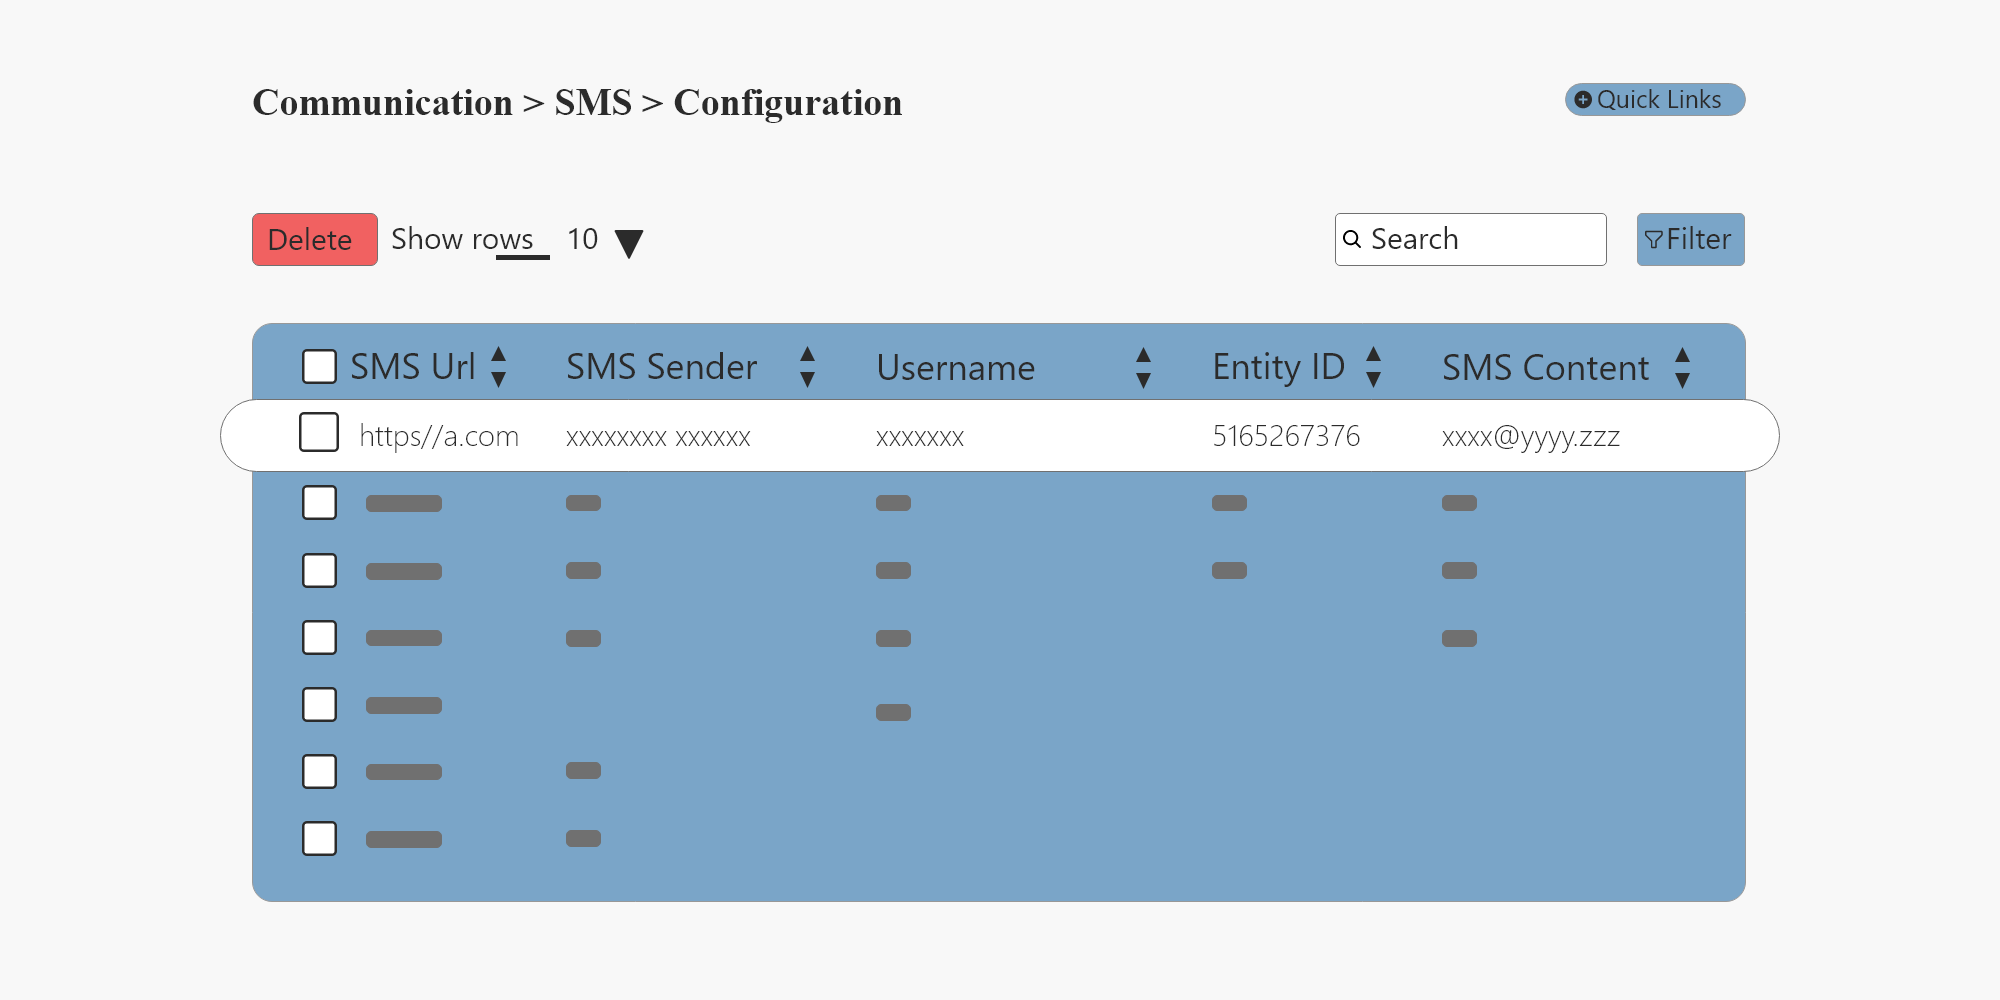 SMS configuration